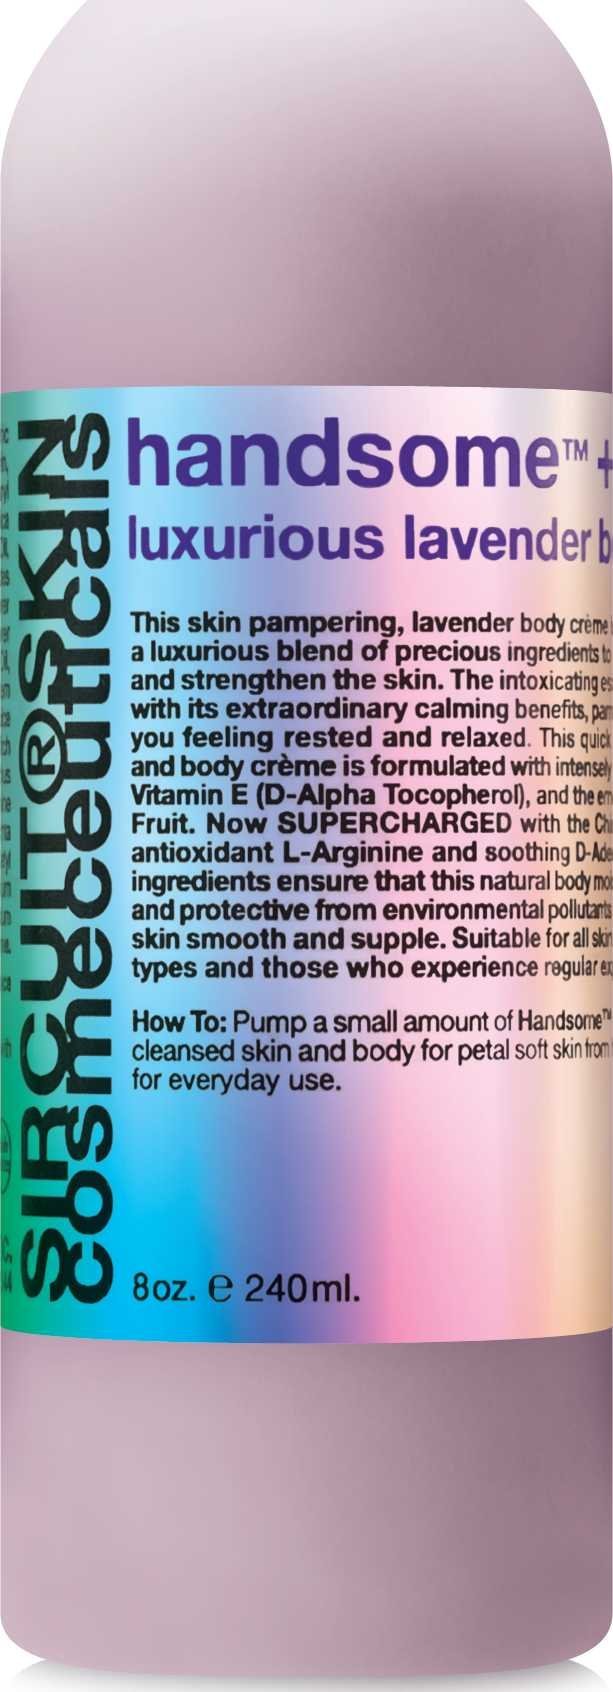 Sircuit Skin LUXURIST Intensive Hydration - Hydrating Body Cream with Shea Butter, Lavender Oil + D-Adenosine - Daily Moisturizer Promotes Smooth Skin (8 oz) - BeesActive Australia